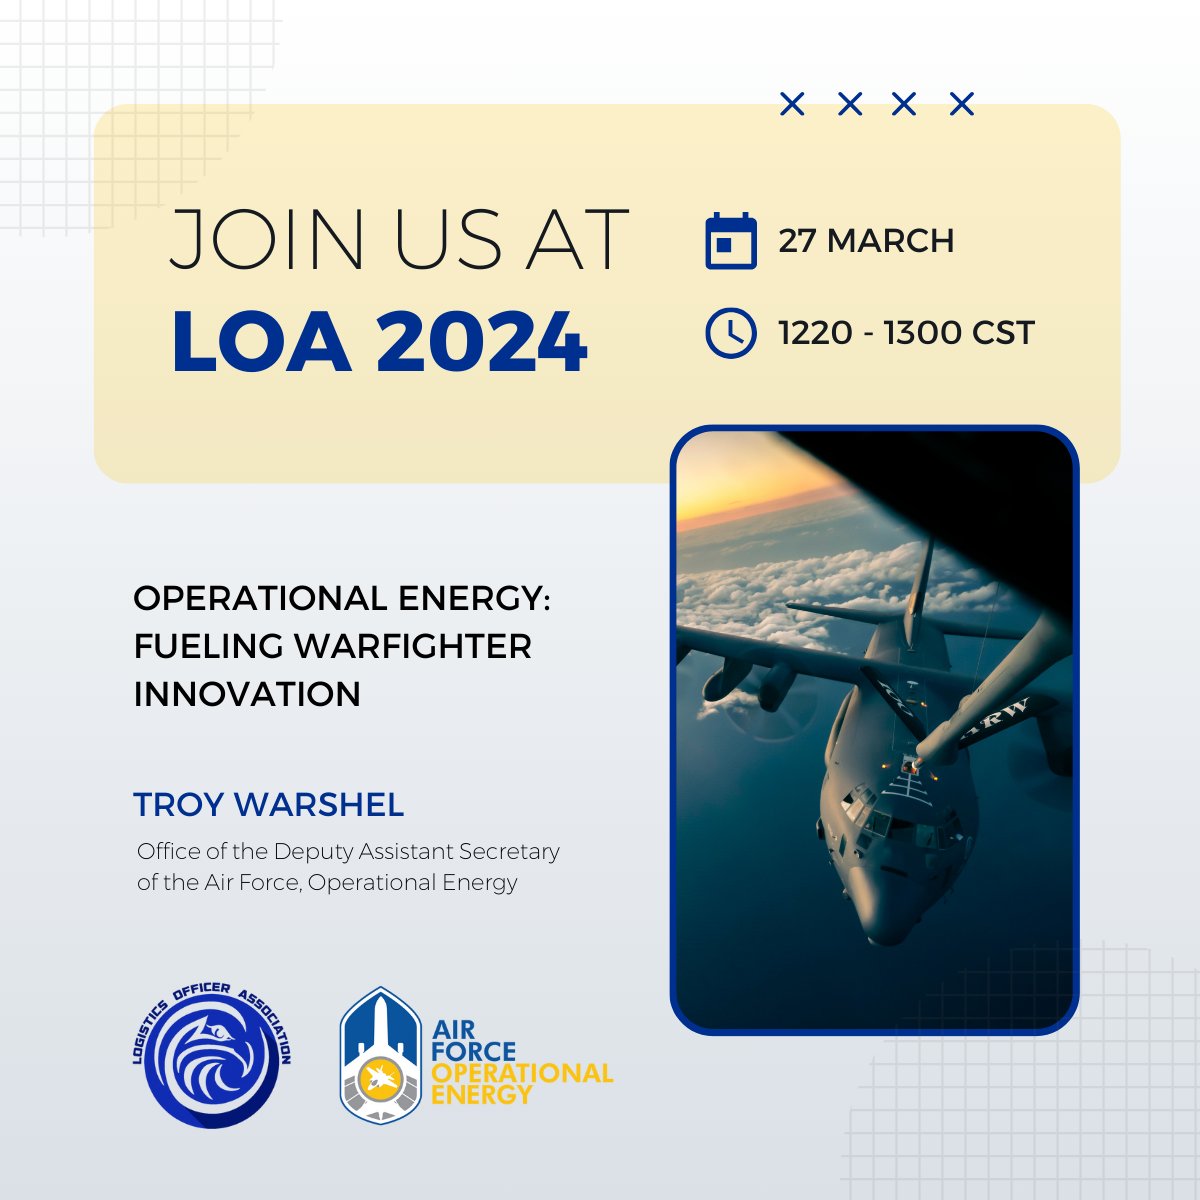 One month until #LOA2024! Don’t miss our breakout session, “Operational Energy: Fueling Warfighter Innovation.” See you in St. Louis!